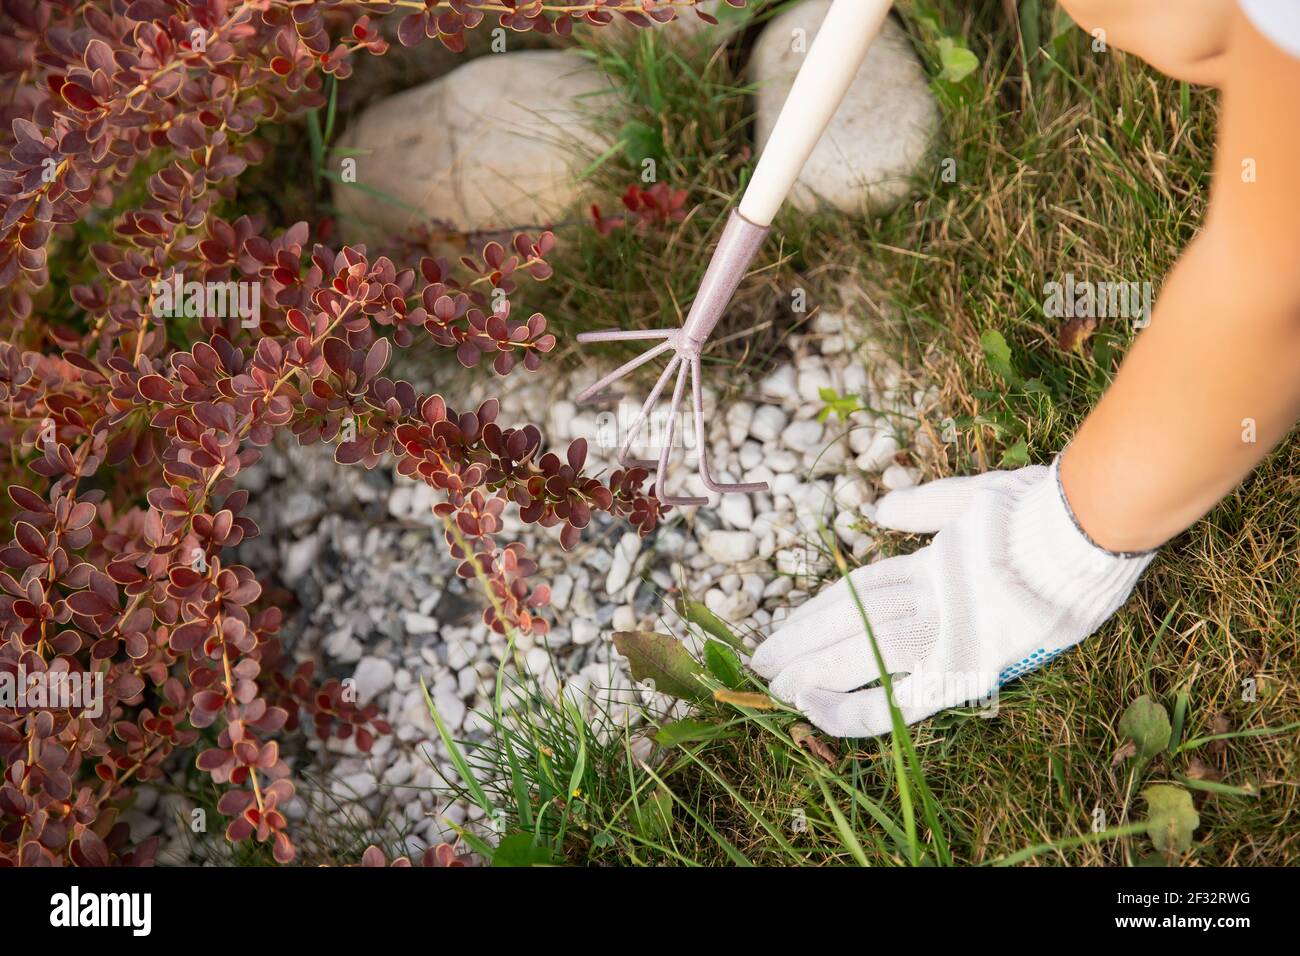 Woman works with mini rake in garden, removes weeds, cuts through plants and flowers. Stock Photo